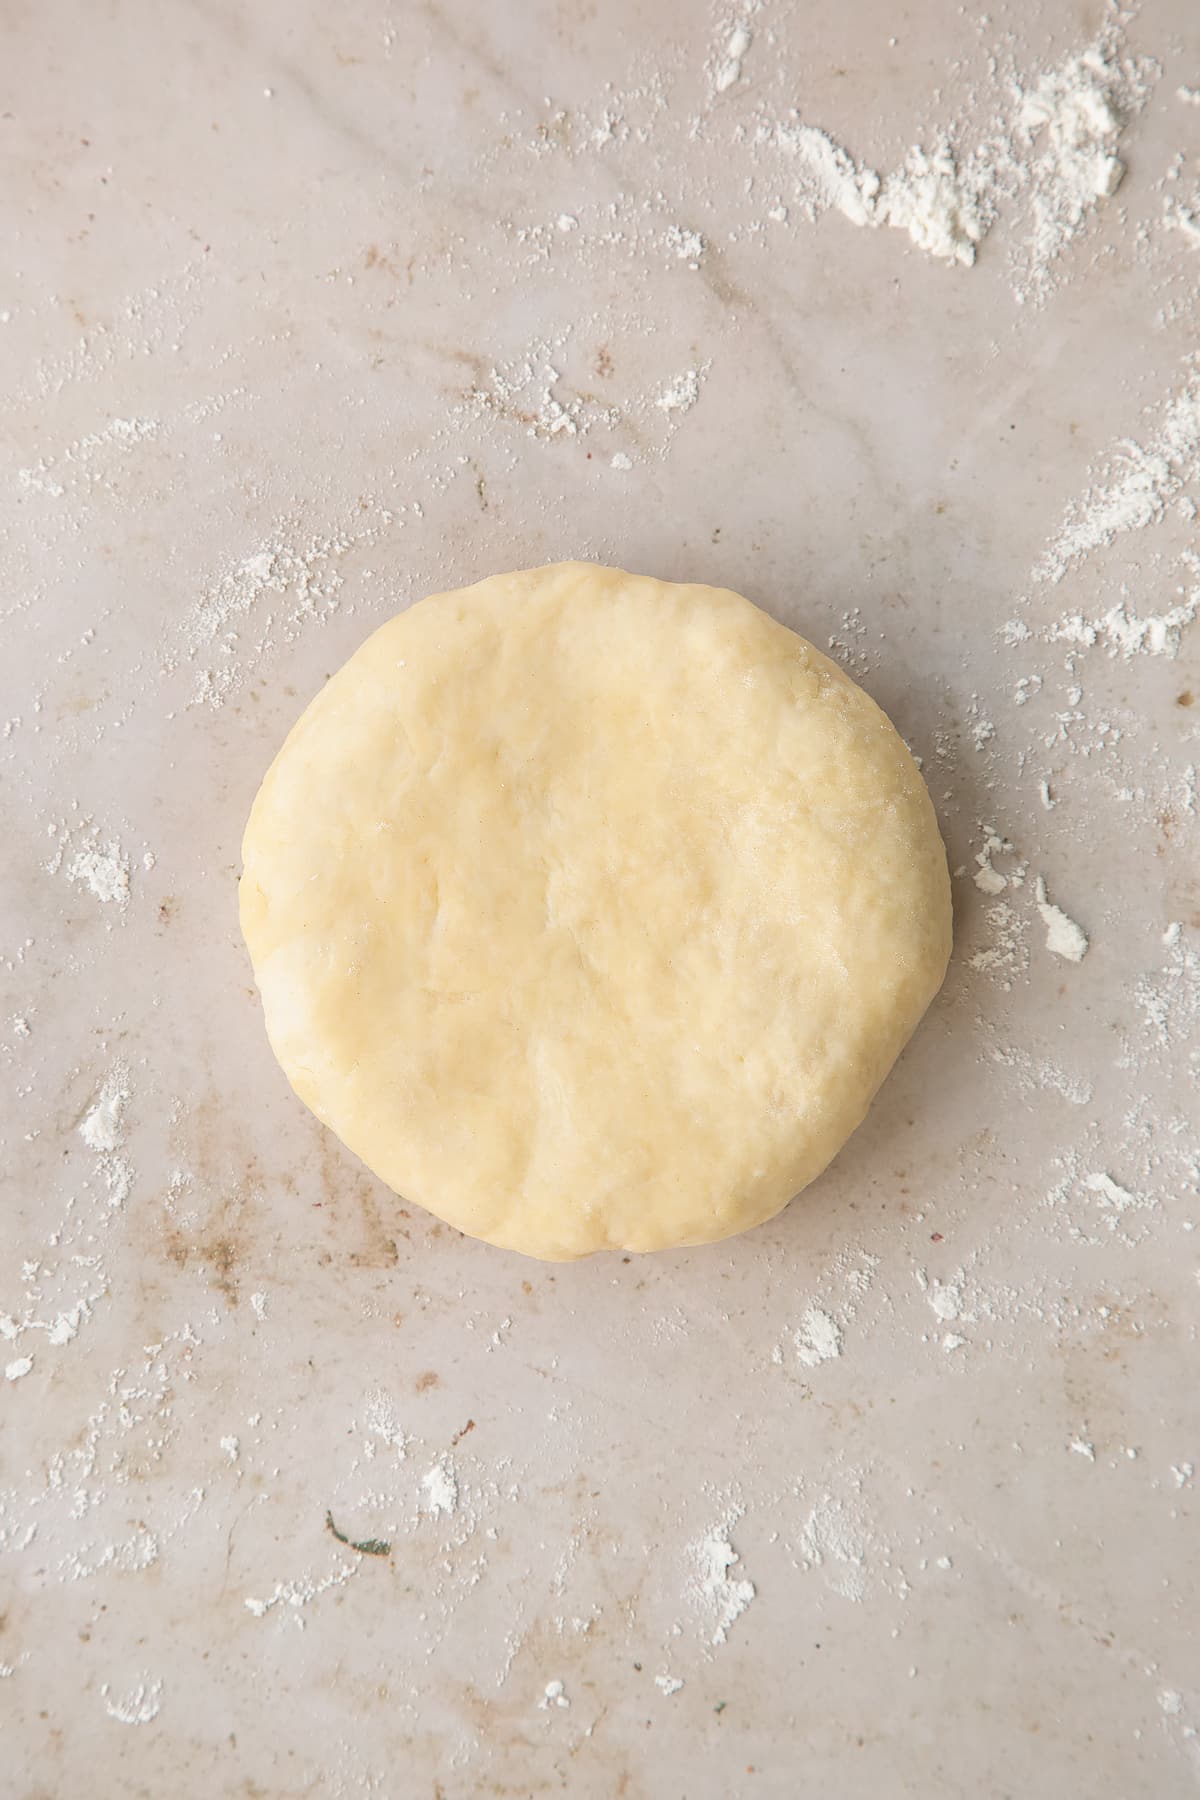 shortcrust pastry dough on a flour surface surrounded by ingredients.